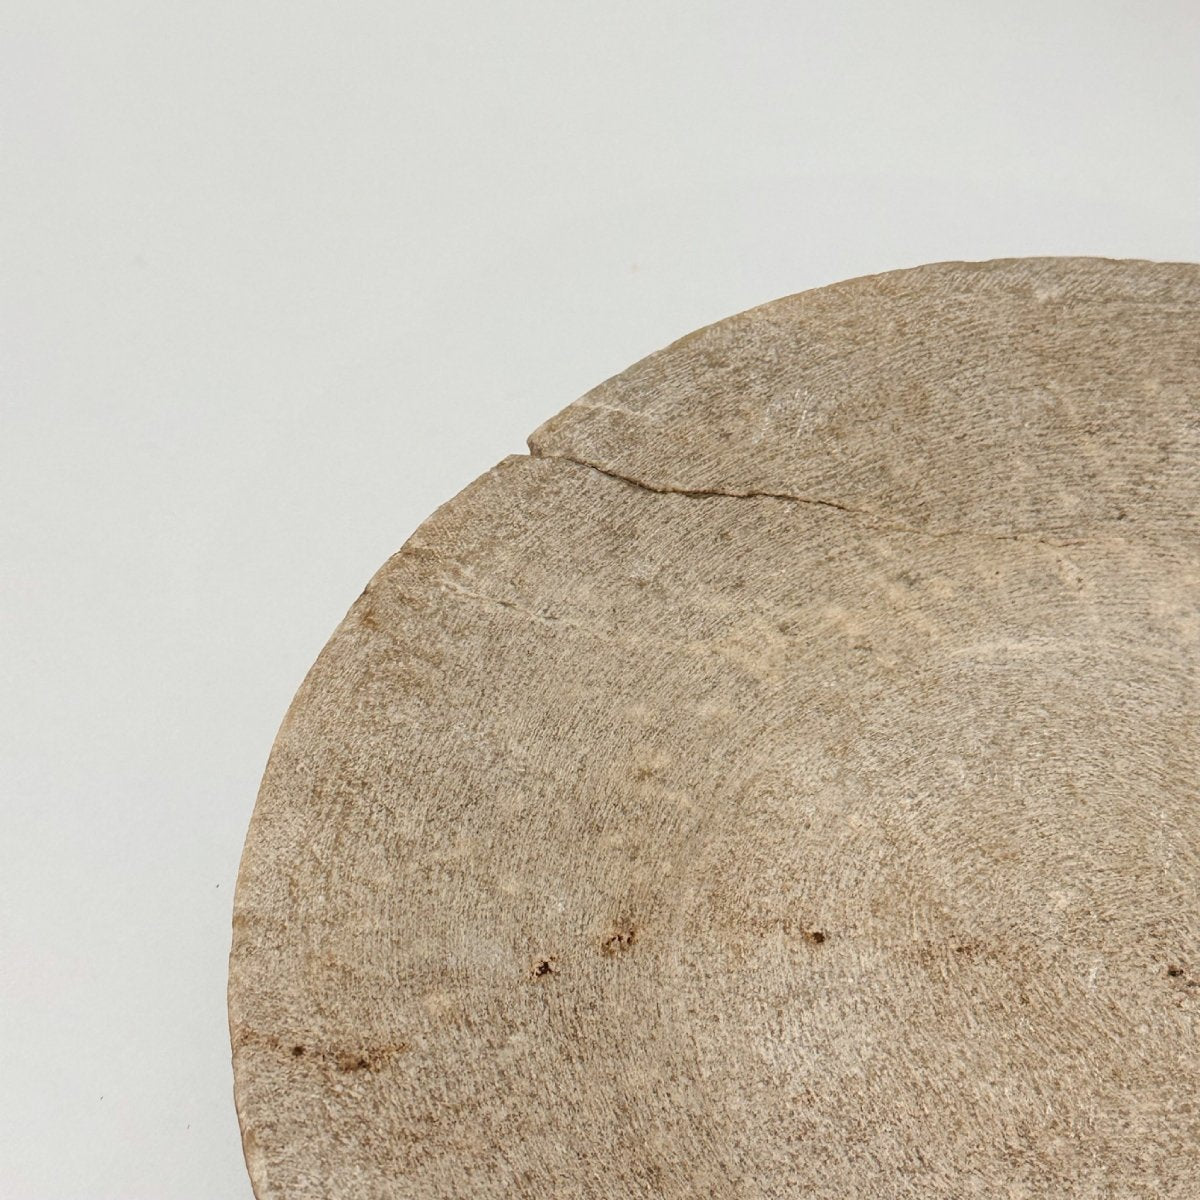 Antiqued Stone Bowl - Tan - SpaceHavenHome